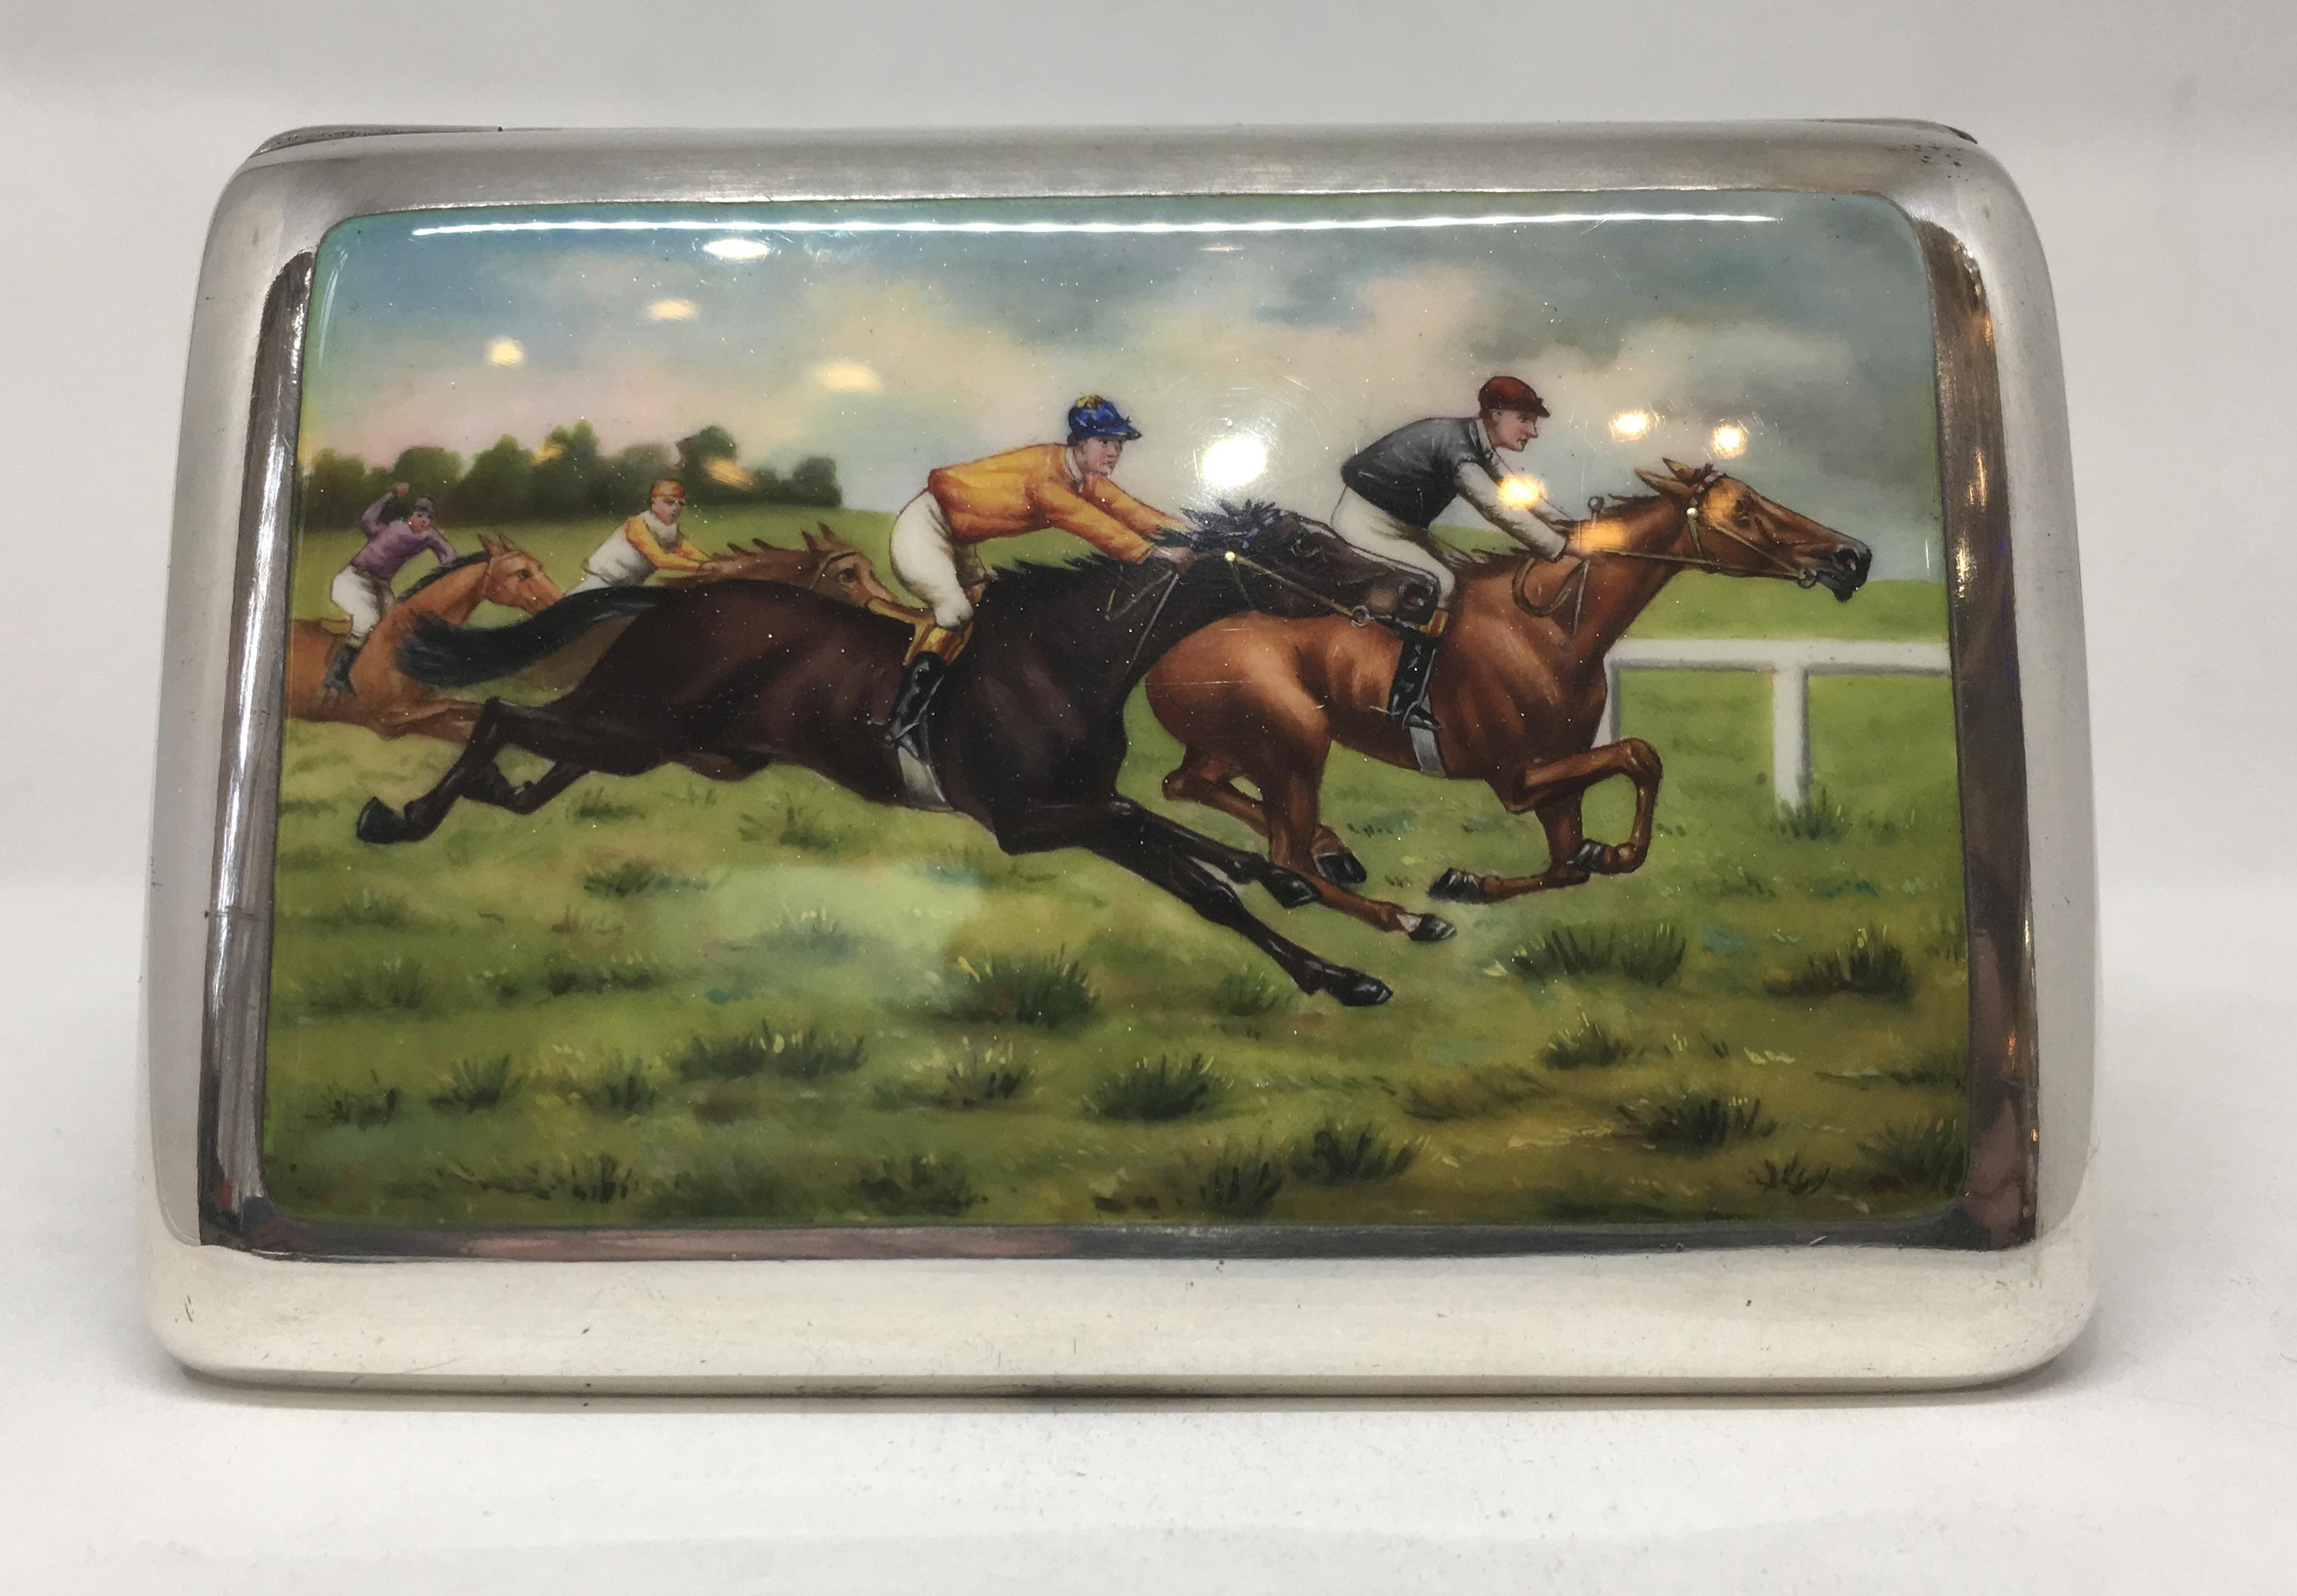 A rare and wonderful horse racing themed, German silver cigarette case, circa 1920.

A delightful scene, with two vying horses in mid gallop, to further runners in the distance. Wonderfully painted, the colors extremely vibrant.

The bridal on both